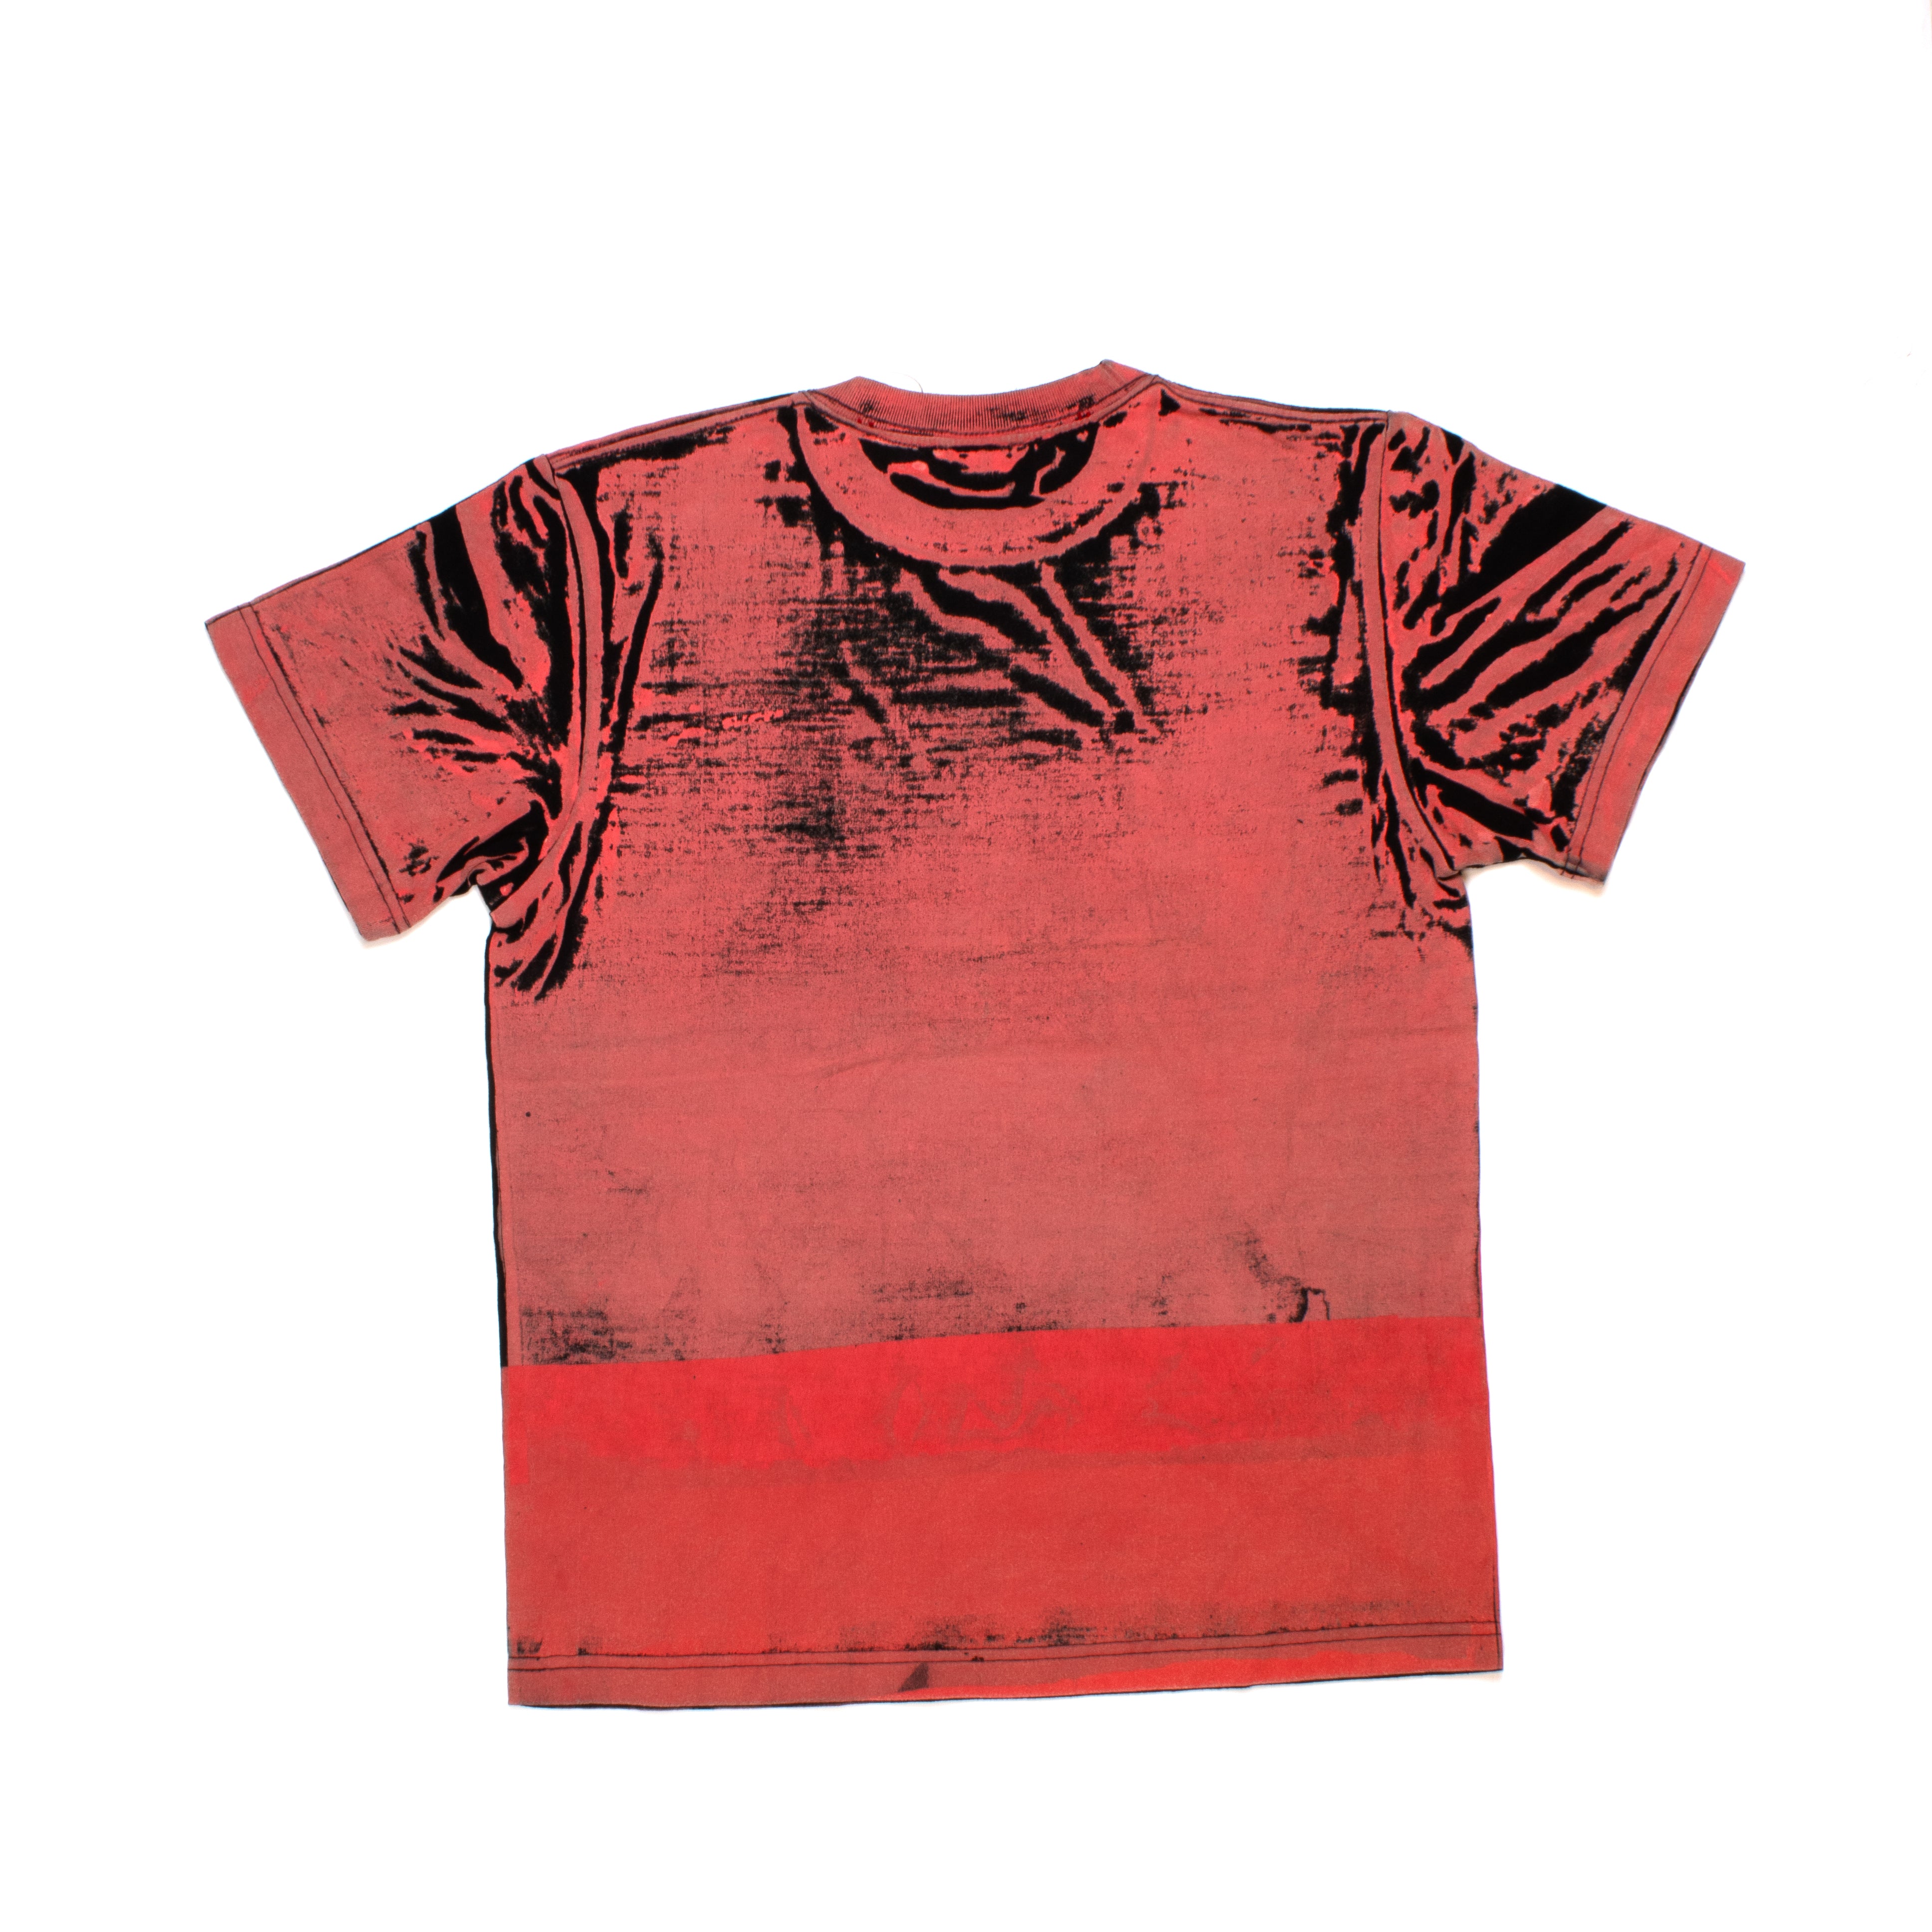 FILTH Red Printed Tee - 2 x 3